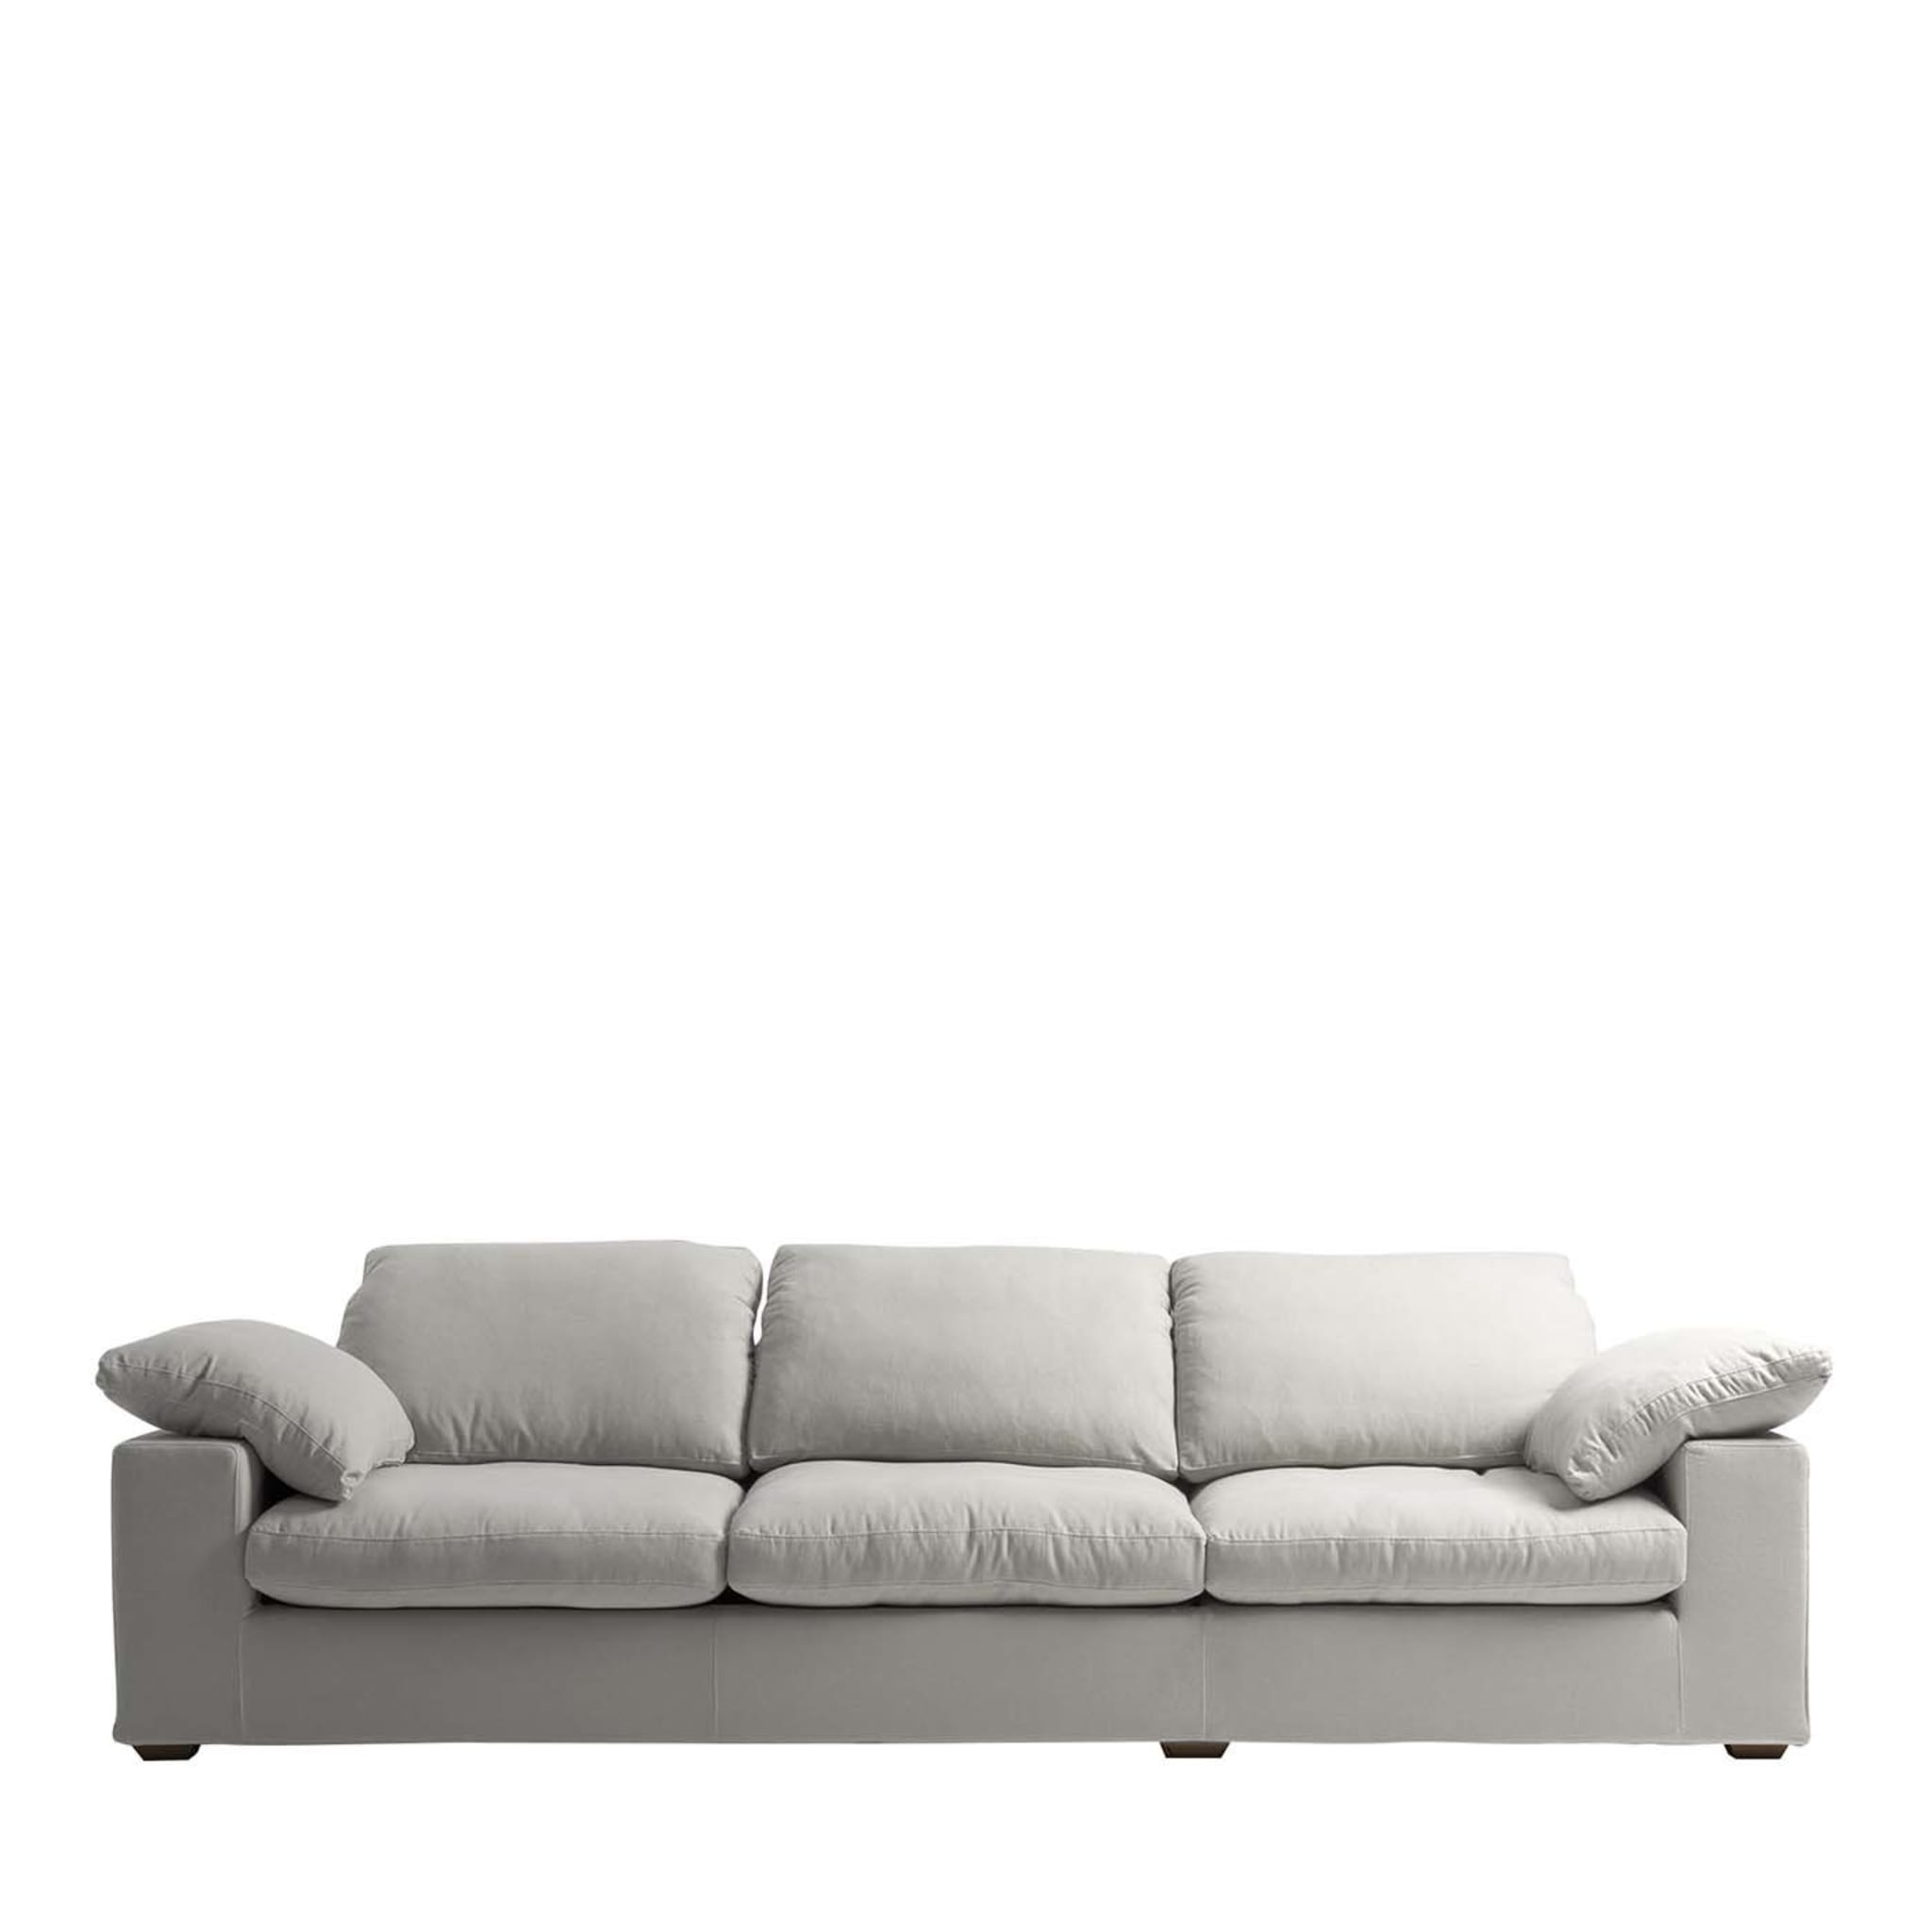 Italo 3-Seater Sofa Tribeca Collection by Marco and Giulio Mantellassi - Main view